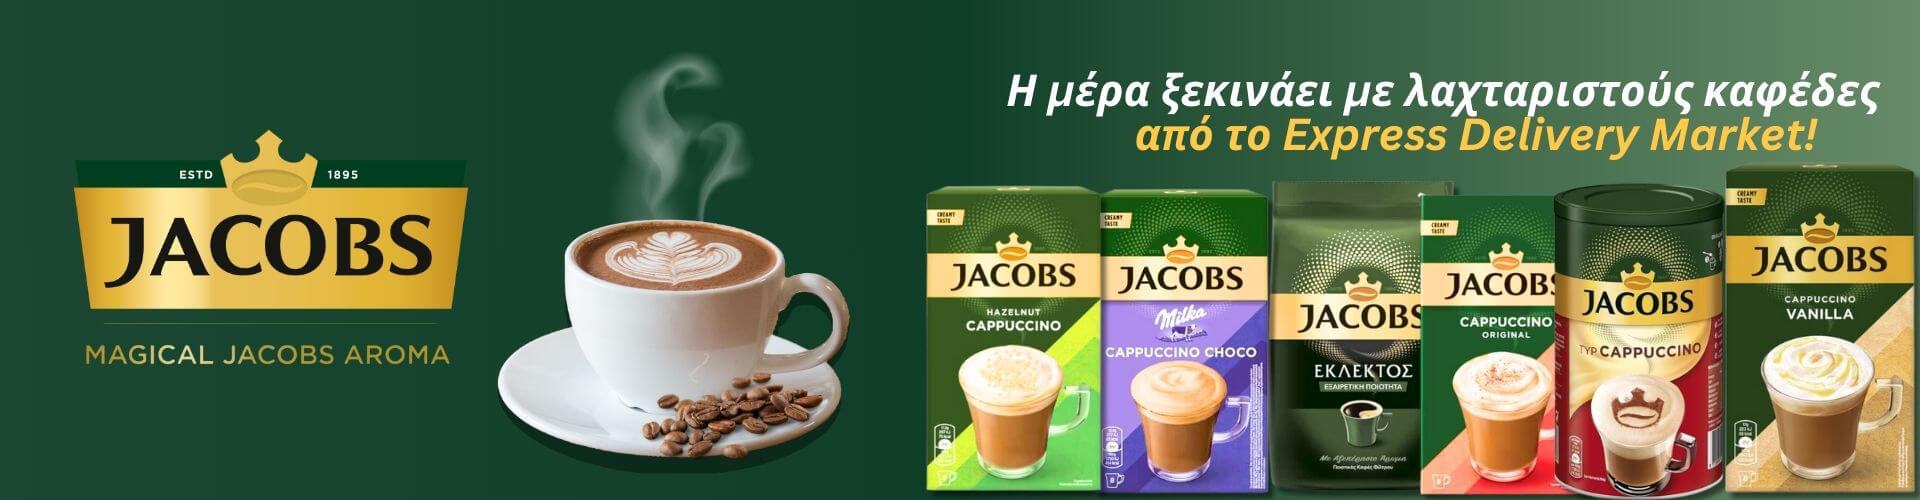 jacobs_coffee_banner_2_v2